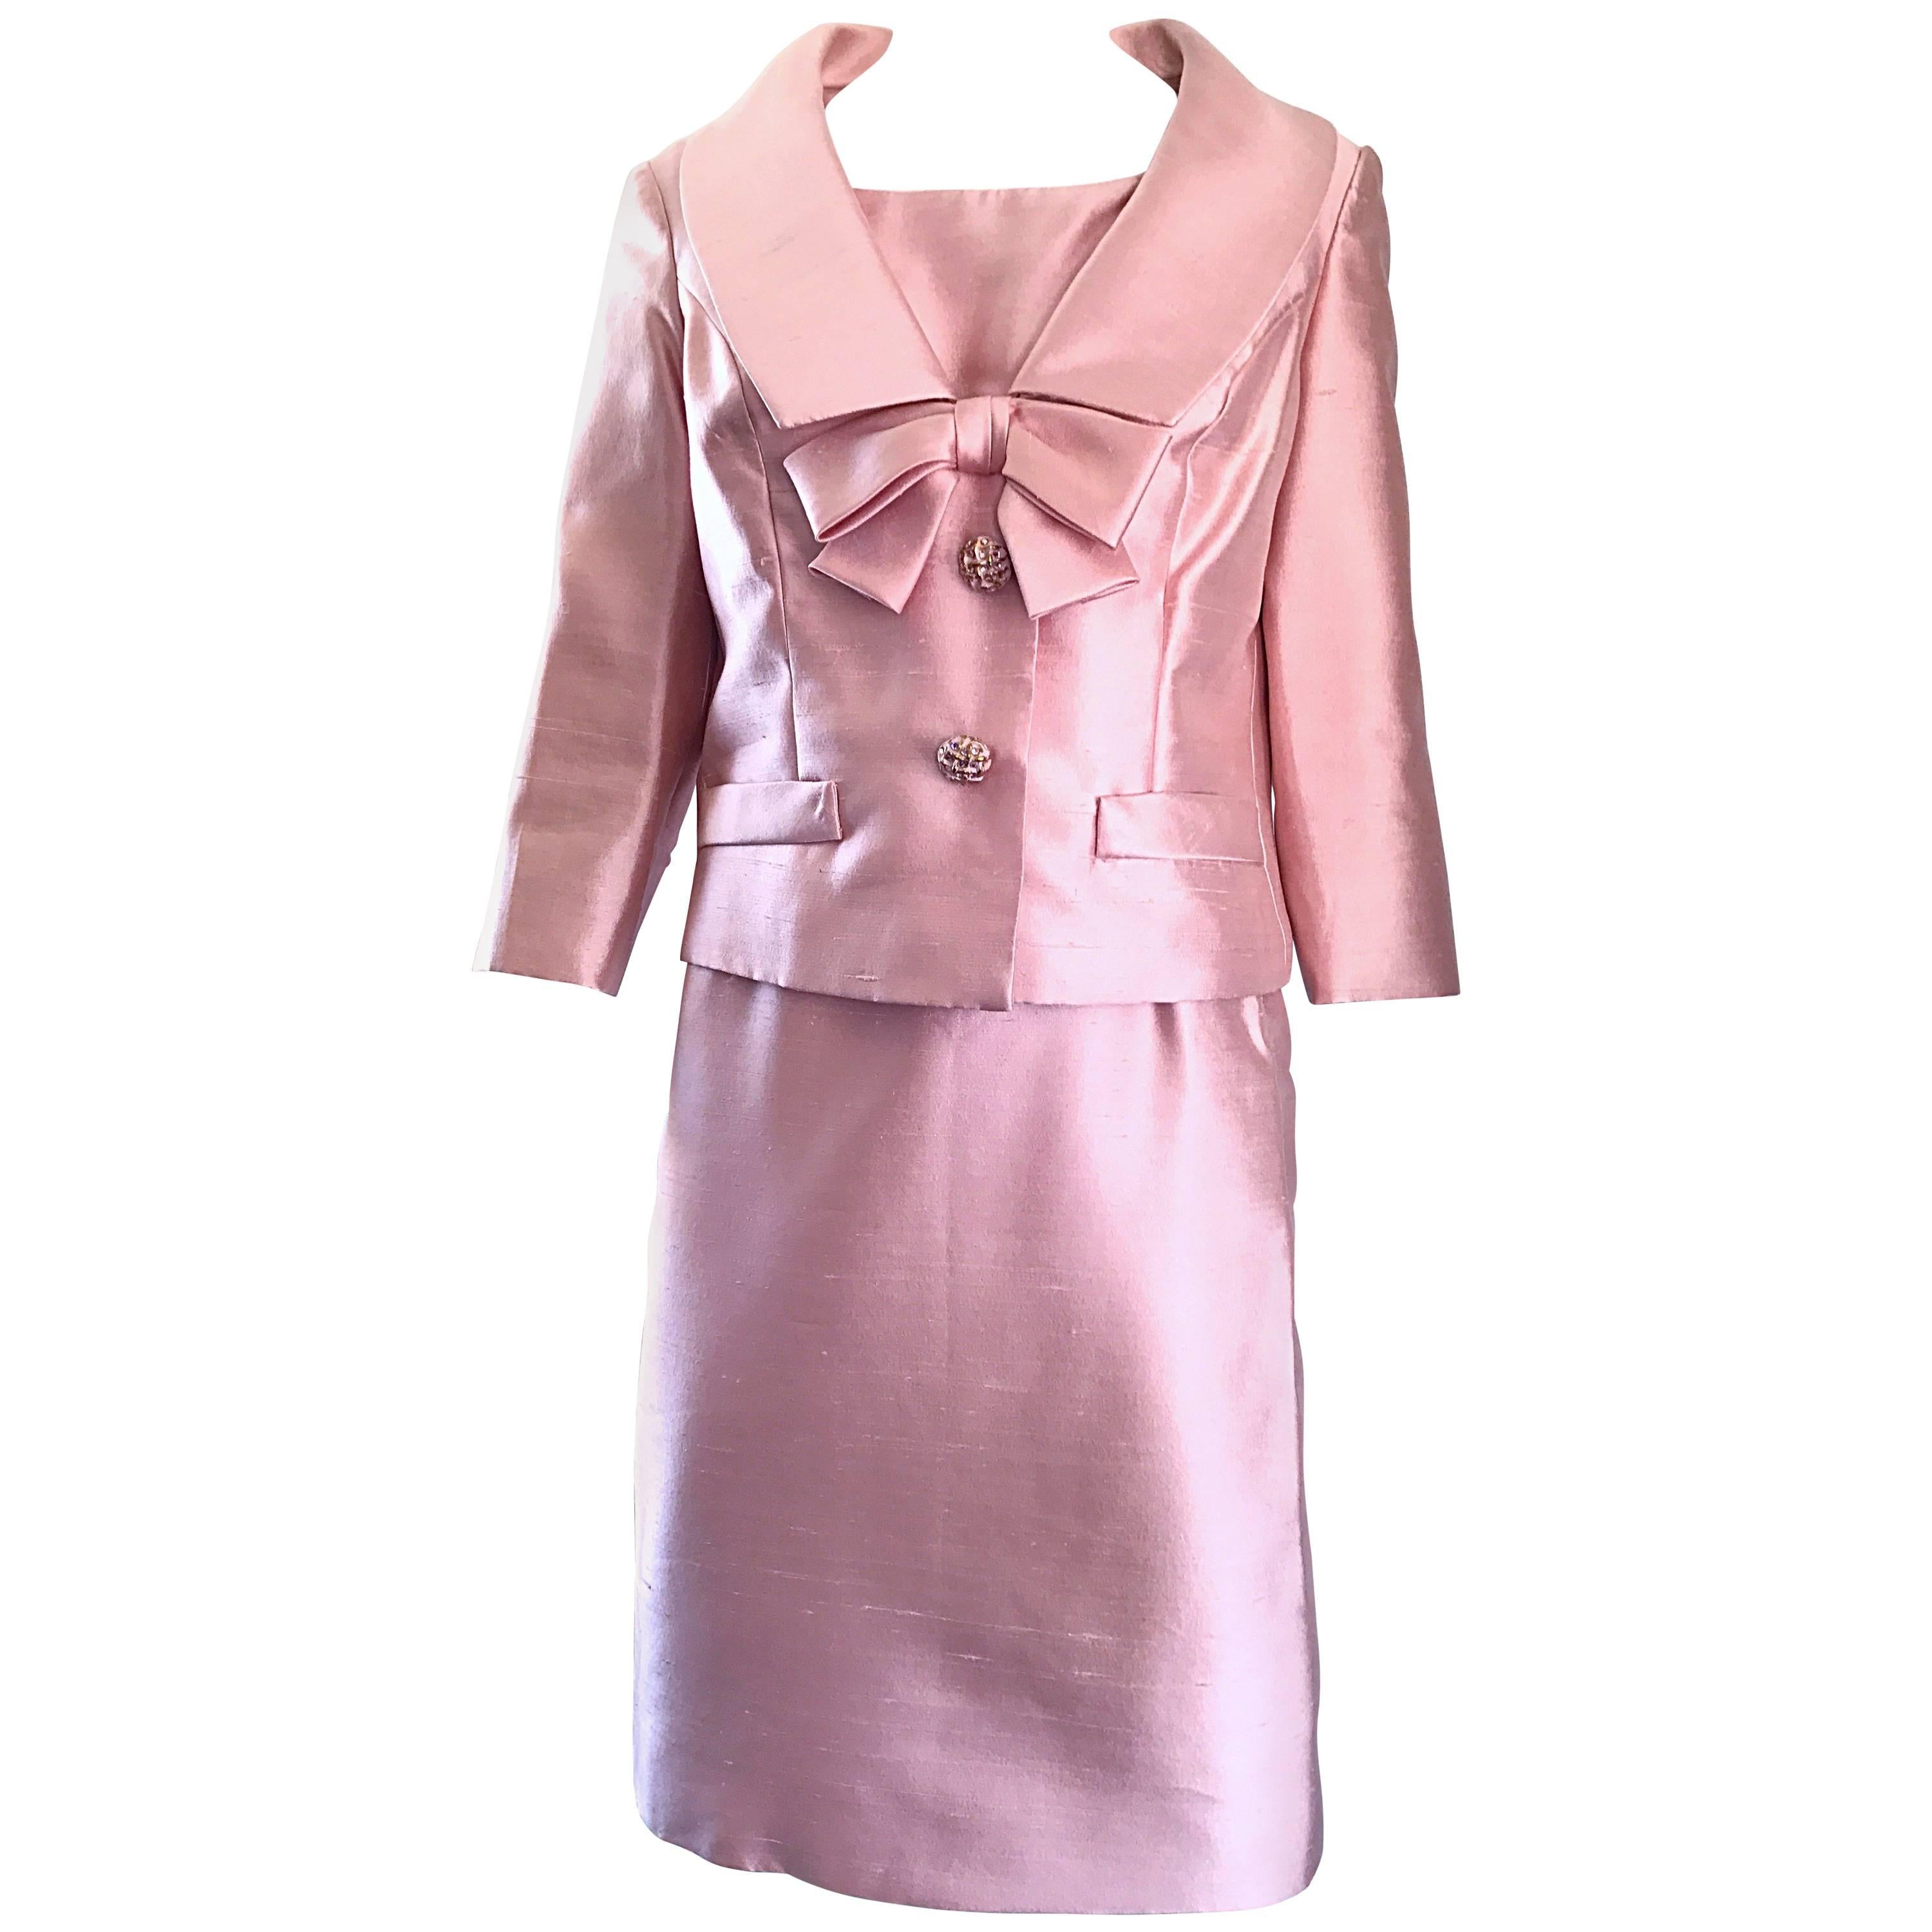 1stDibs Gorgeous 1960s Demi Couture Pale Pink Silk Shantung Dress and Jacket Ensemble